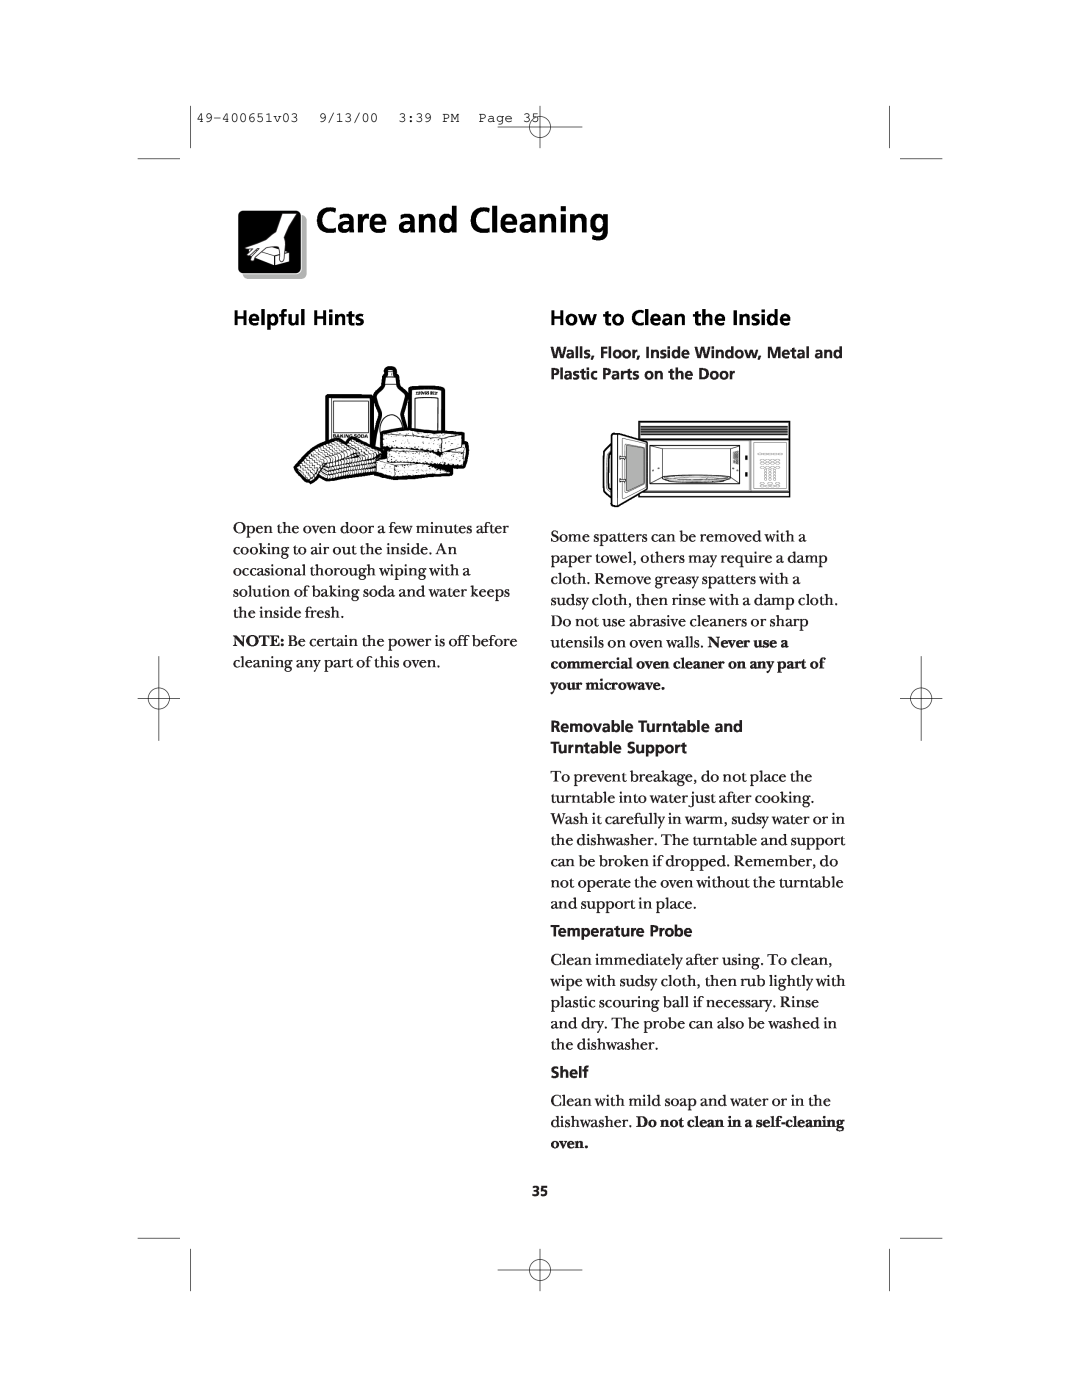 Frigidaire FMT148 Care and Cleaning, Helpful Hints, How to Clean the Inside, Removable Turntable and Turntable Support 